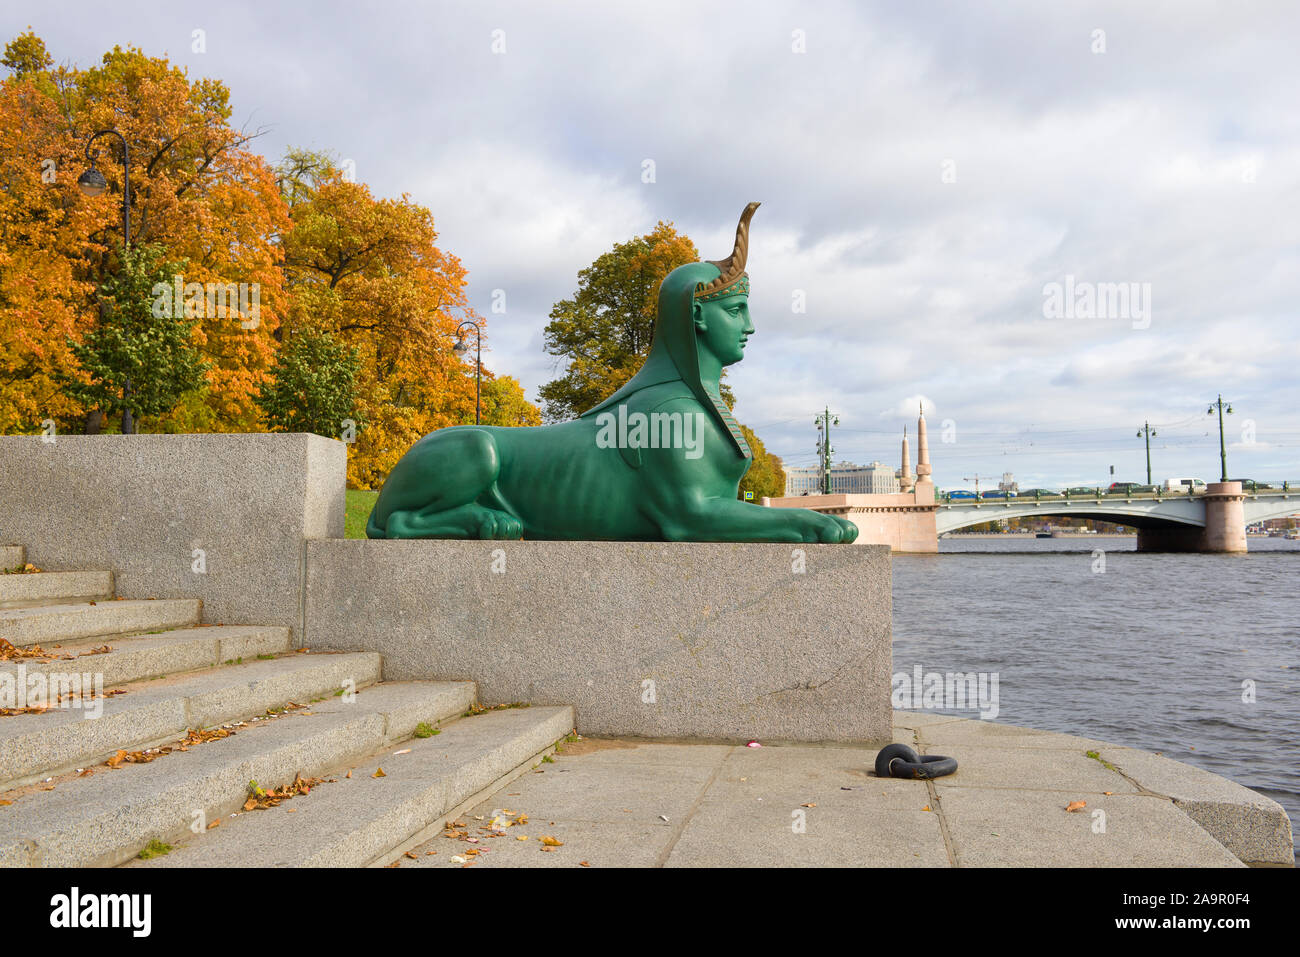 Sculpture of the Sphinx close-up on the pier cloudy October day. Stone island, St. Petersburg Stock Photo